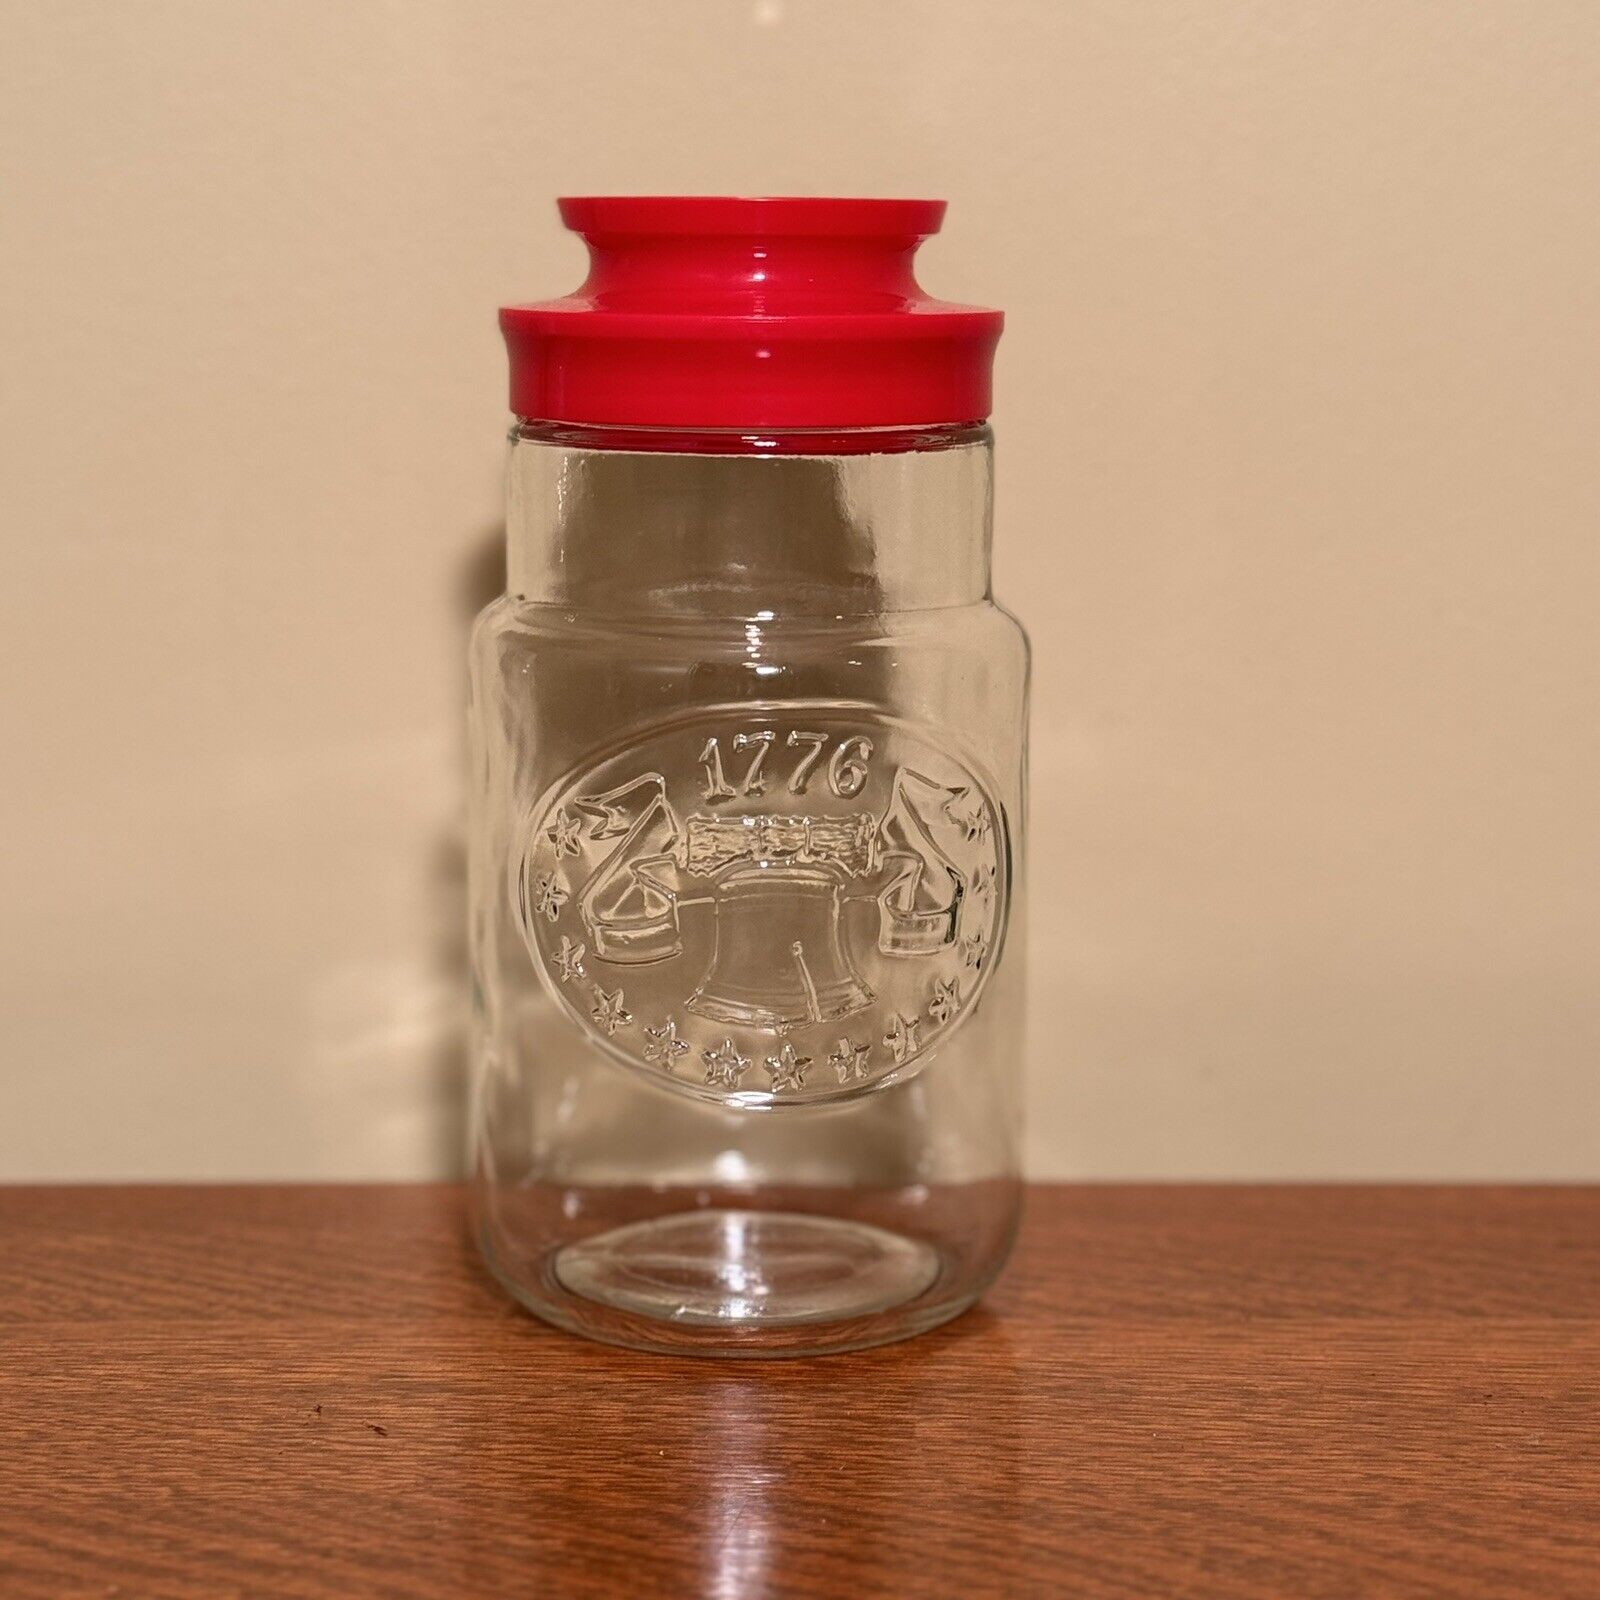 Anchor Hocking 1976 Bicentennial Jar With Red Cap Liberty Bell Vintage